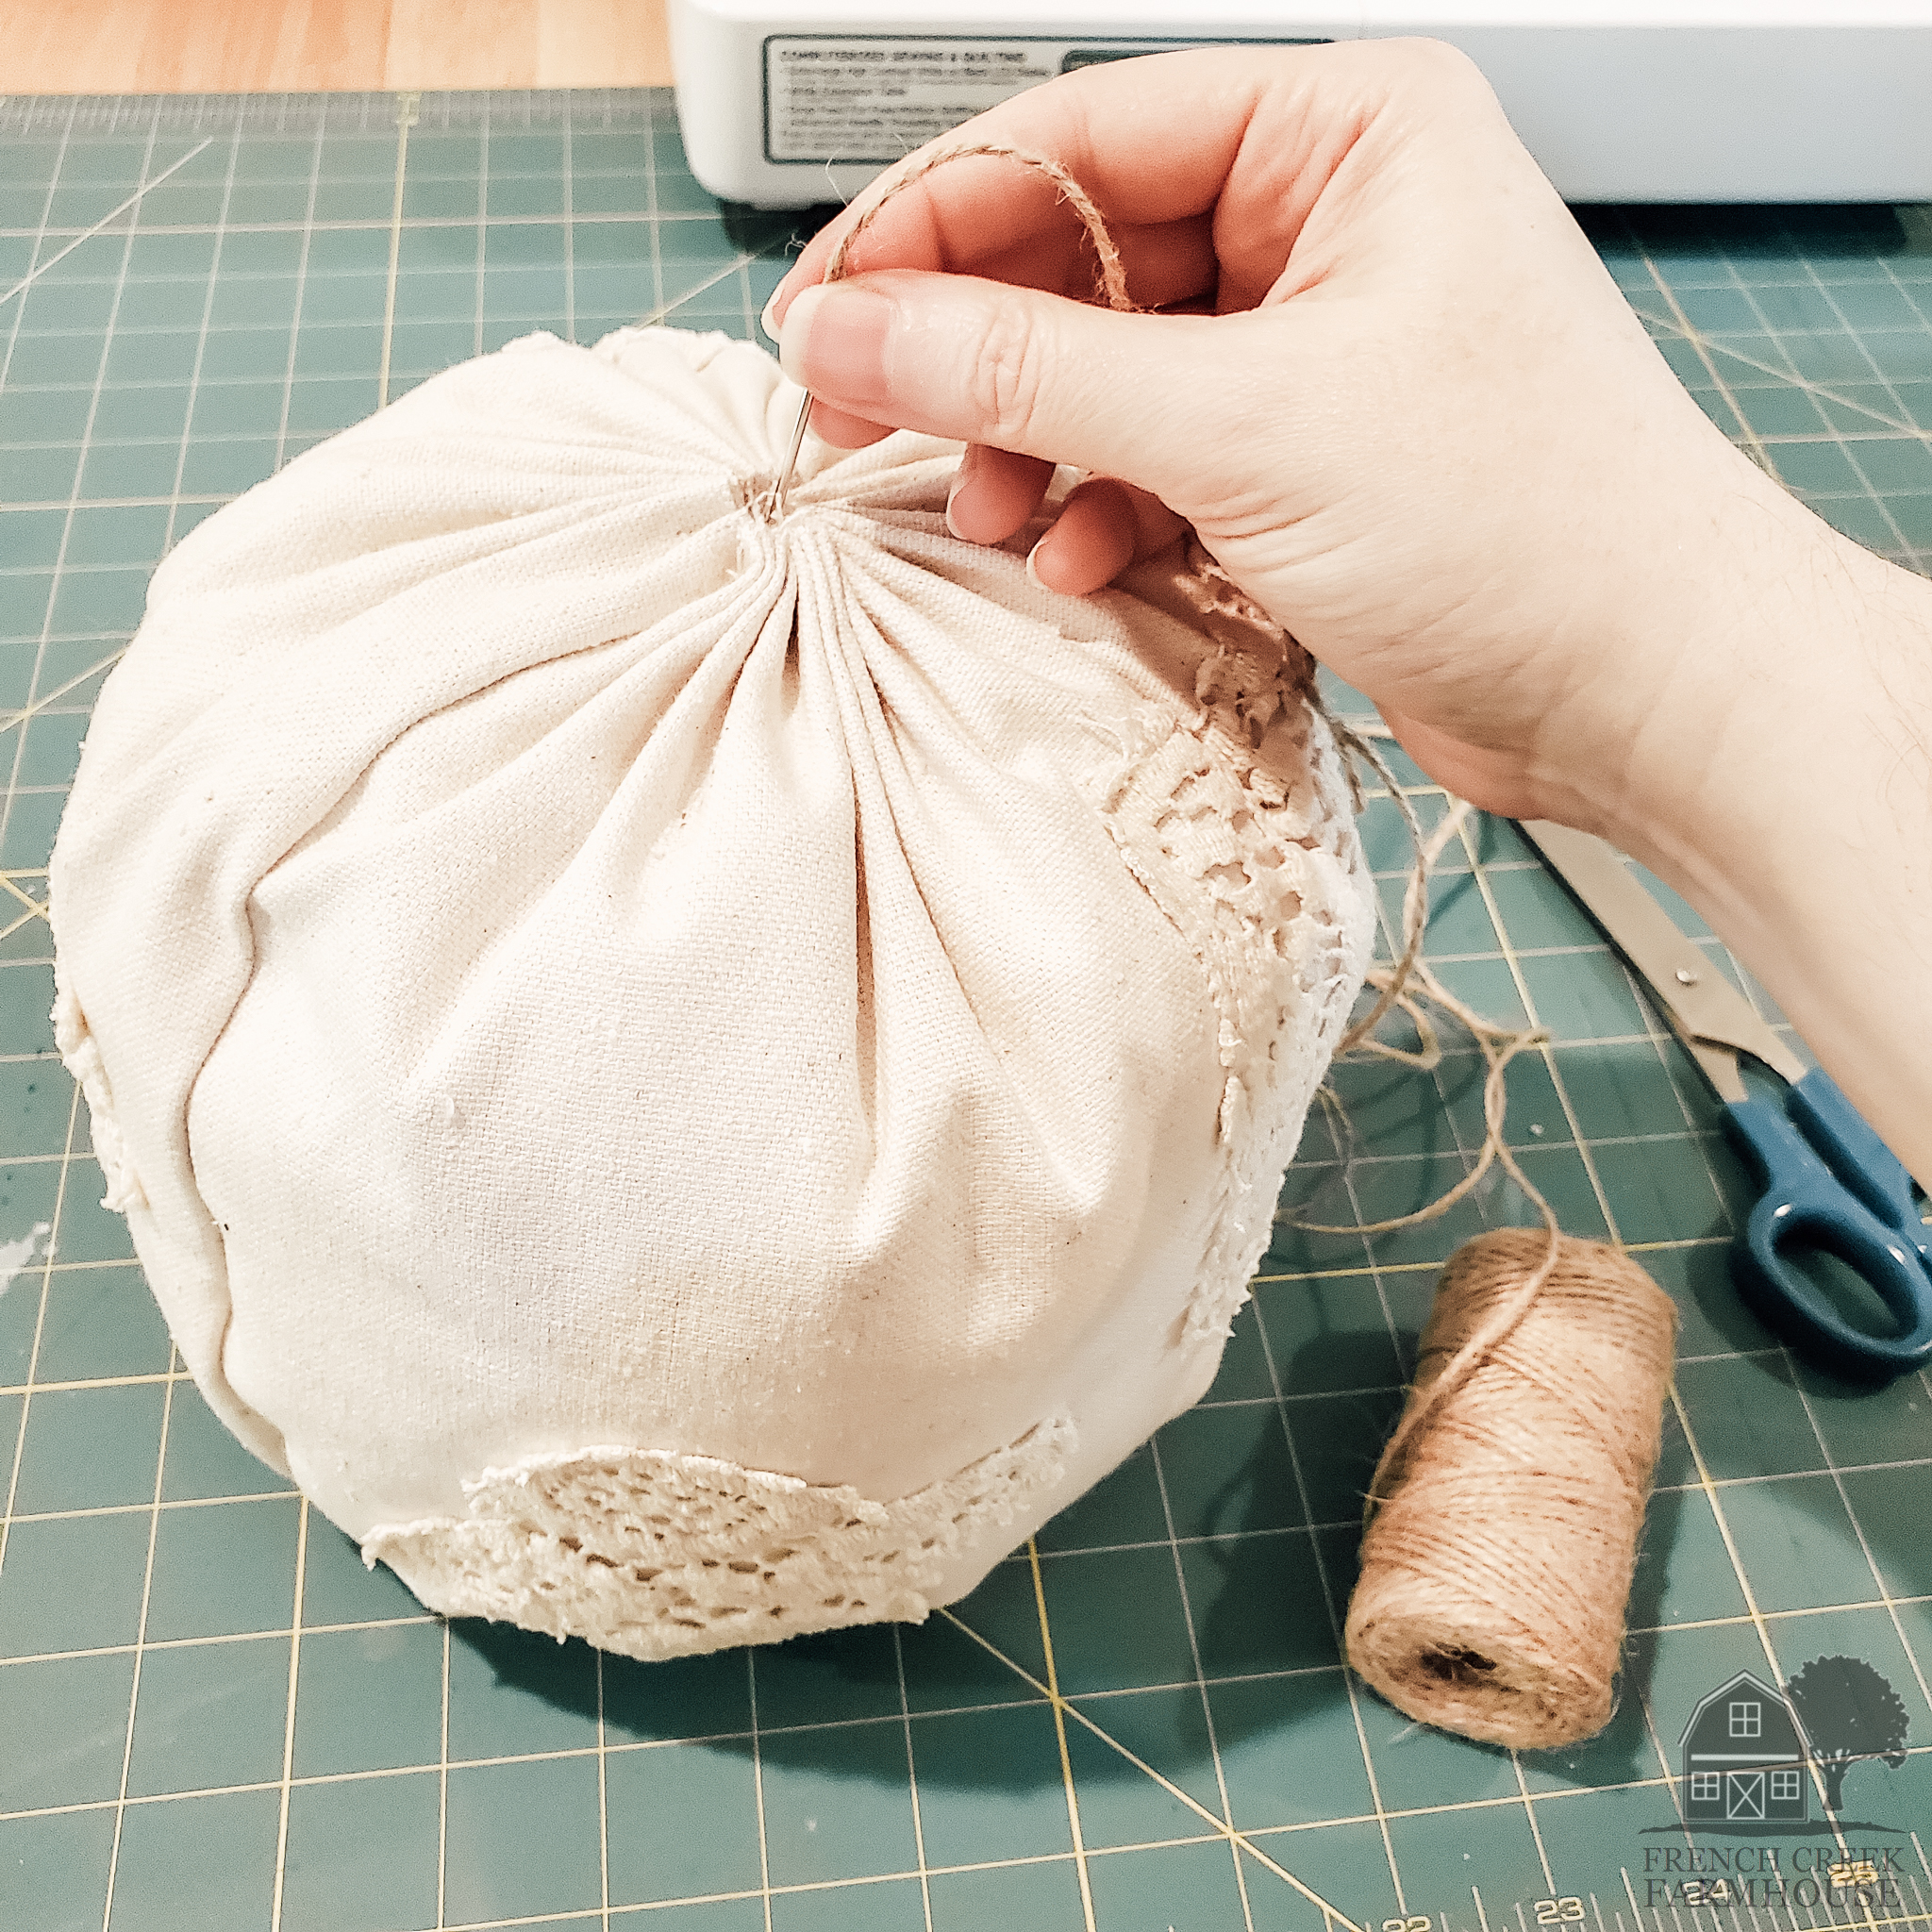 Transform your fabric ball to a pumpkin with twine